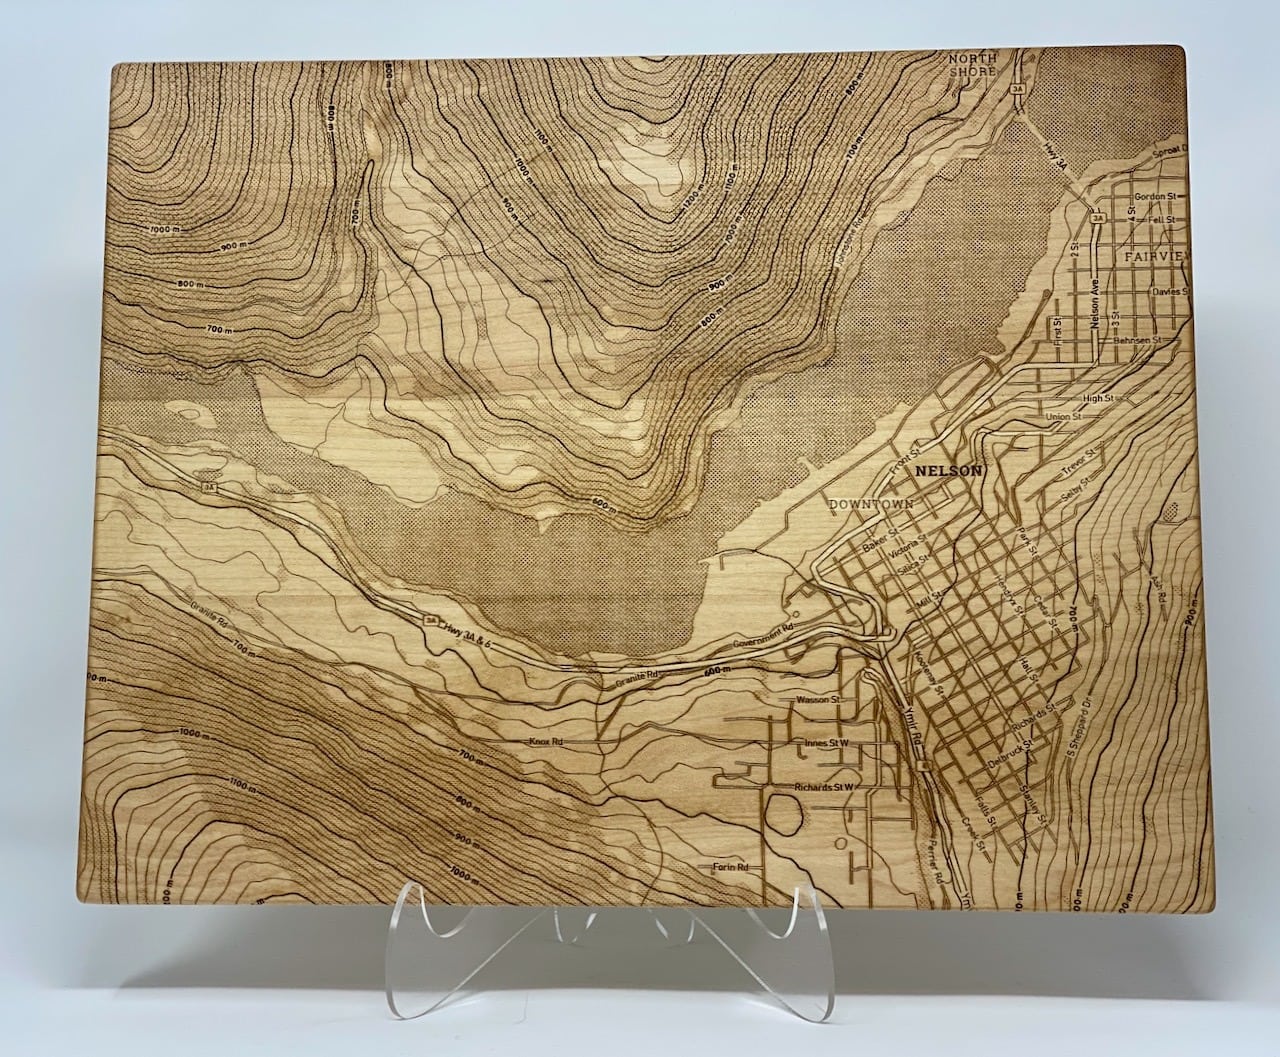 Creating unique map gifts and products using your laser engraver